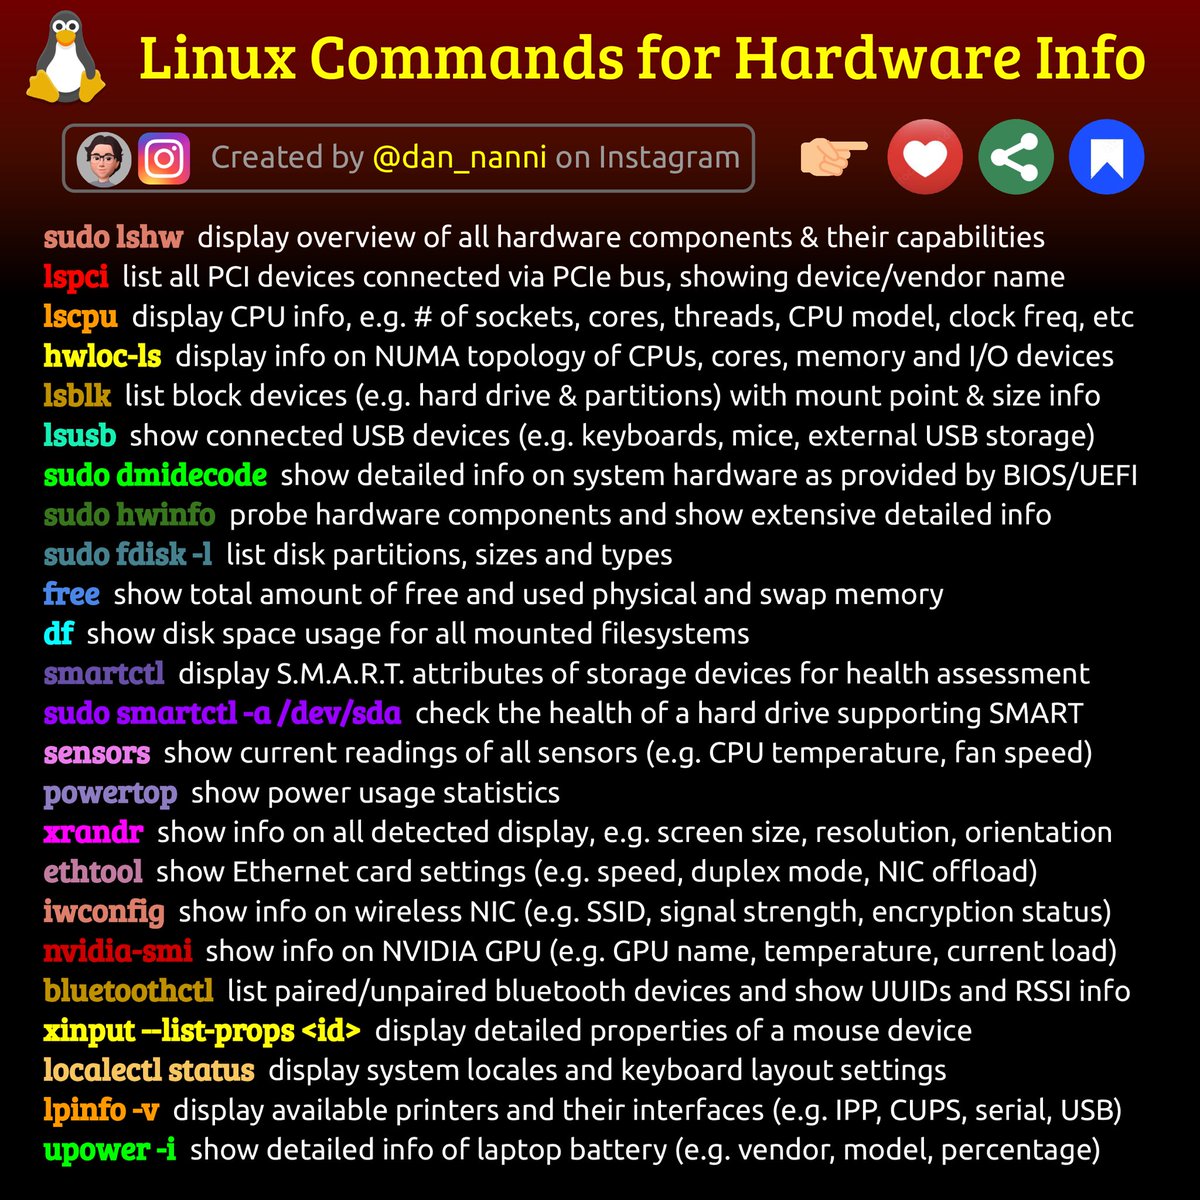 Linux Commands for Hardware Info. ✌️🔥
by @xmodulo 

#cybersecurity #pentesting #bluetooth #informationsecurity #hacking #DataSecurity #CyberSec #infosec #bugbountytips #Linux #websecurity #Network #NetworkSecurity #hacks #hacker #tools  #logs #web #server #python #programming